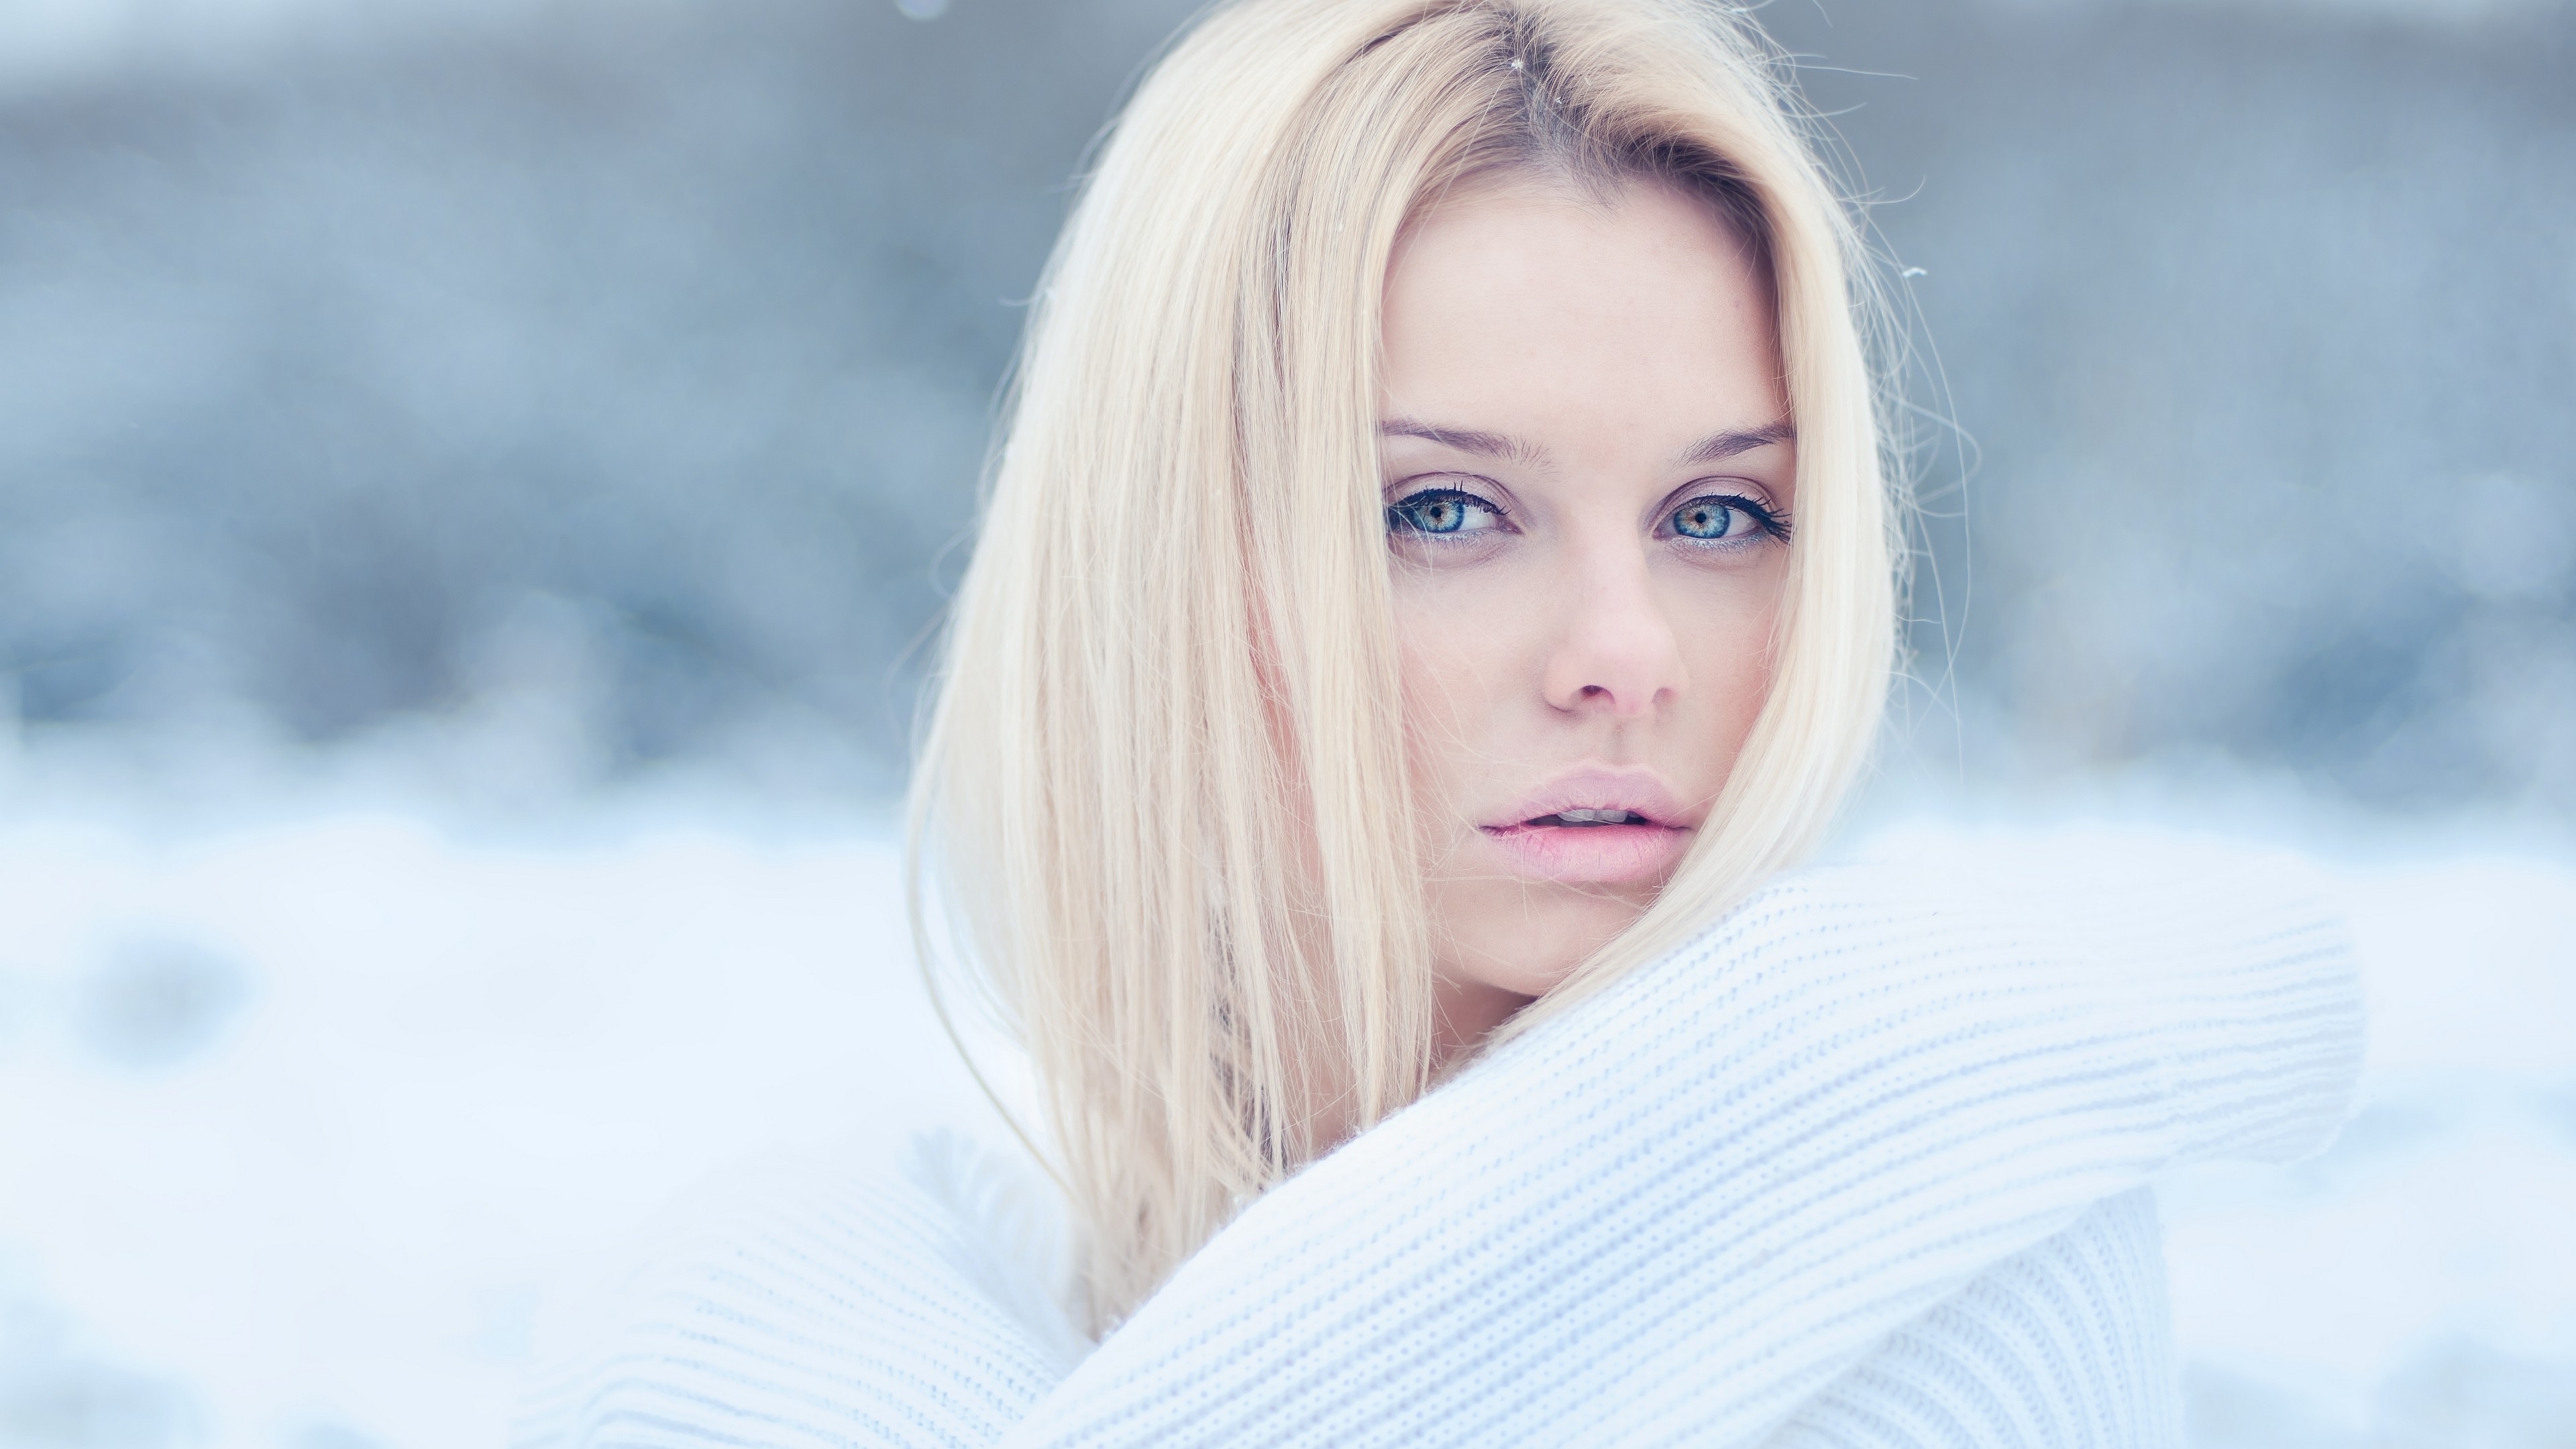 A blonde-haired girl in a white turtleneck.